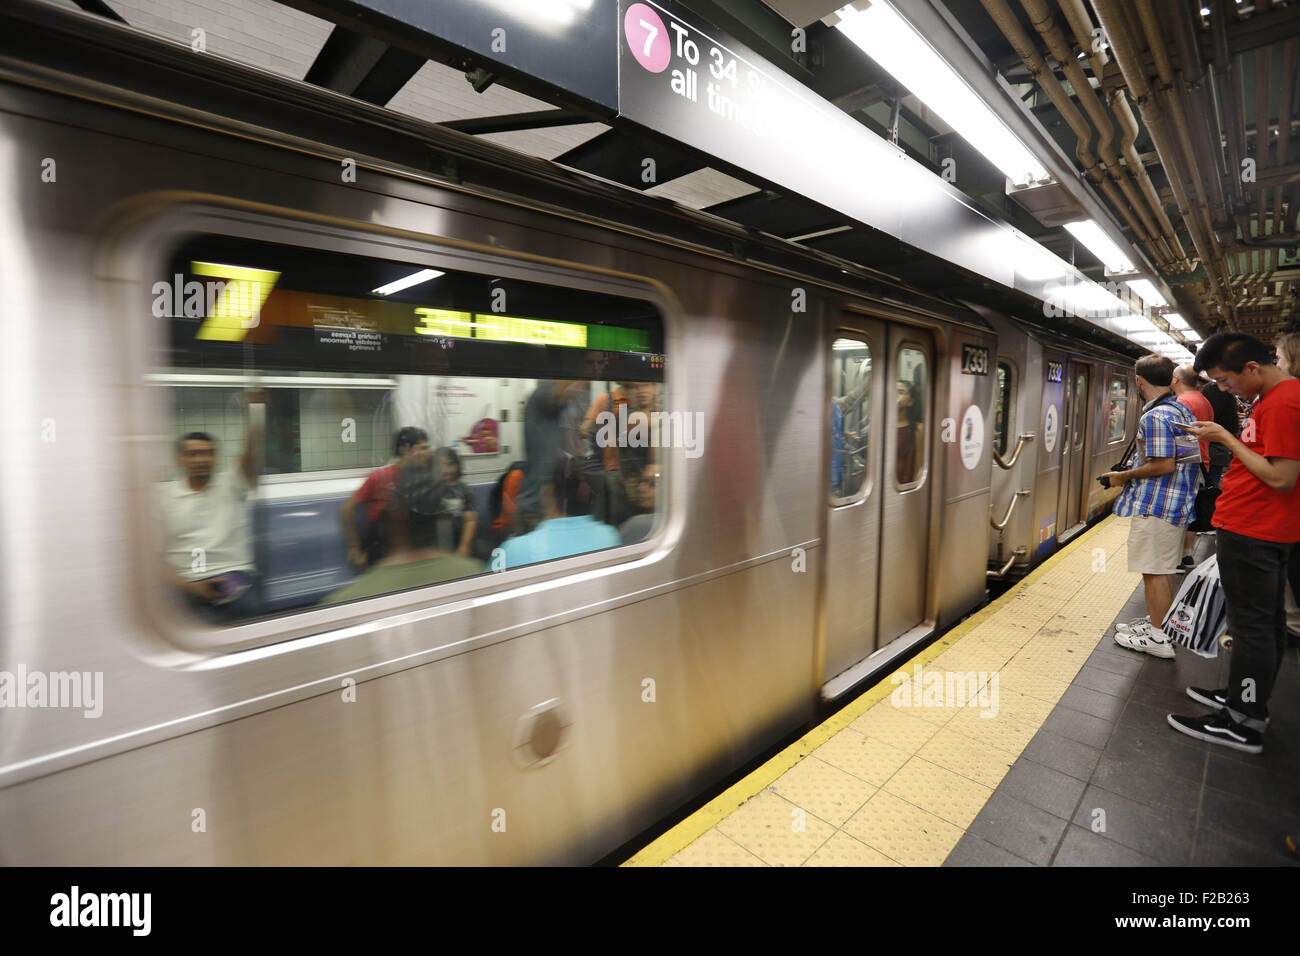 Manhattan, New York, USA. 13th Sep, 2015. A No. 7 train leaving the Times Square station on its way to the new 34th Street-Hudson Yards No. 7 station, in the Far West Side of Manhattan, NY. The new subway station, part of the 7 subway extension for the IRT Flushing Line of the New York City Subway, is located at 34th Street near 11th Ave and cost $2.4 billion to complete. It is the 469th station and the first completely new station to be opened in 25 years. © Angel Chevrestt/ZUMA Wire/Alamy Live News Stock Photo